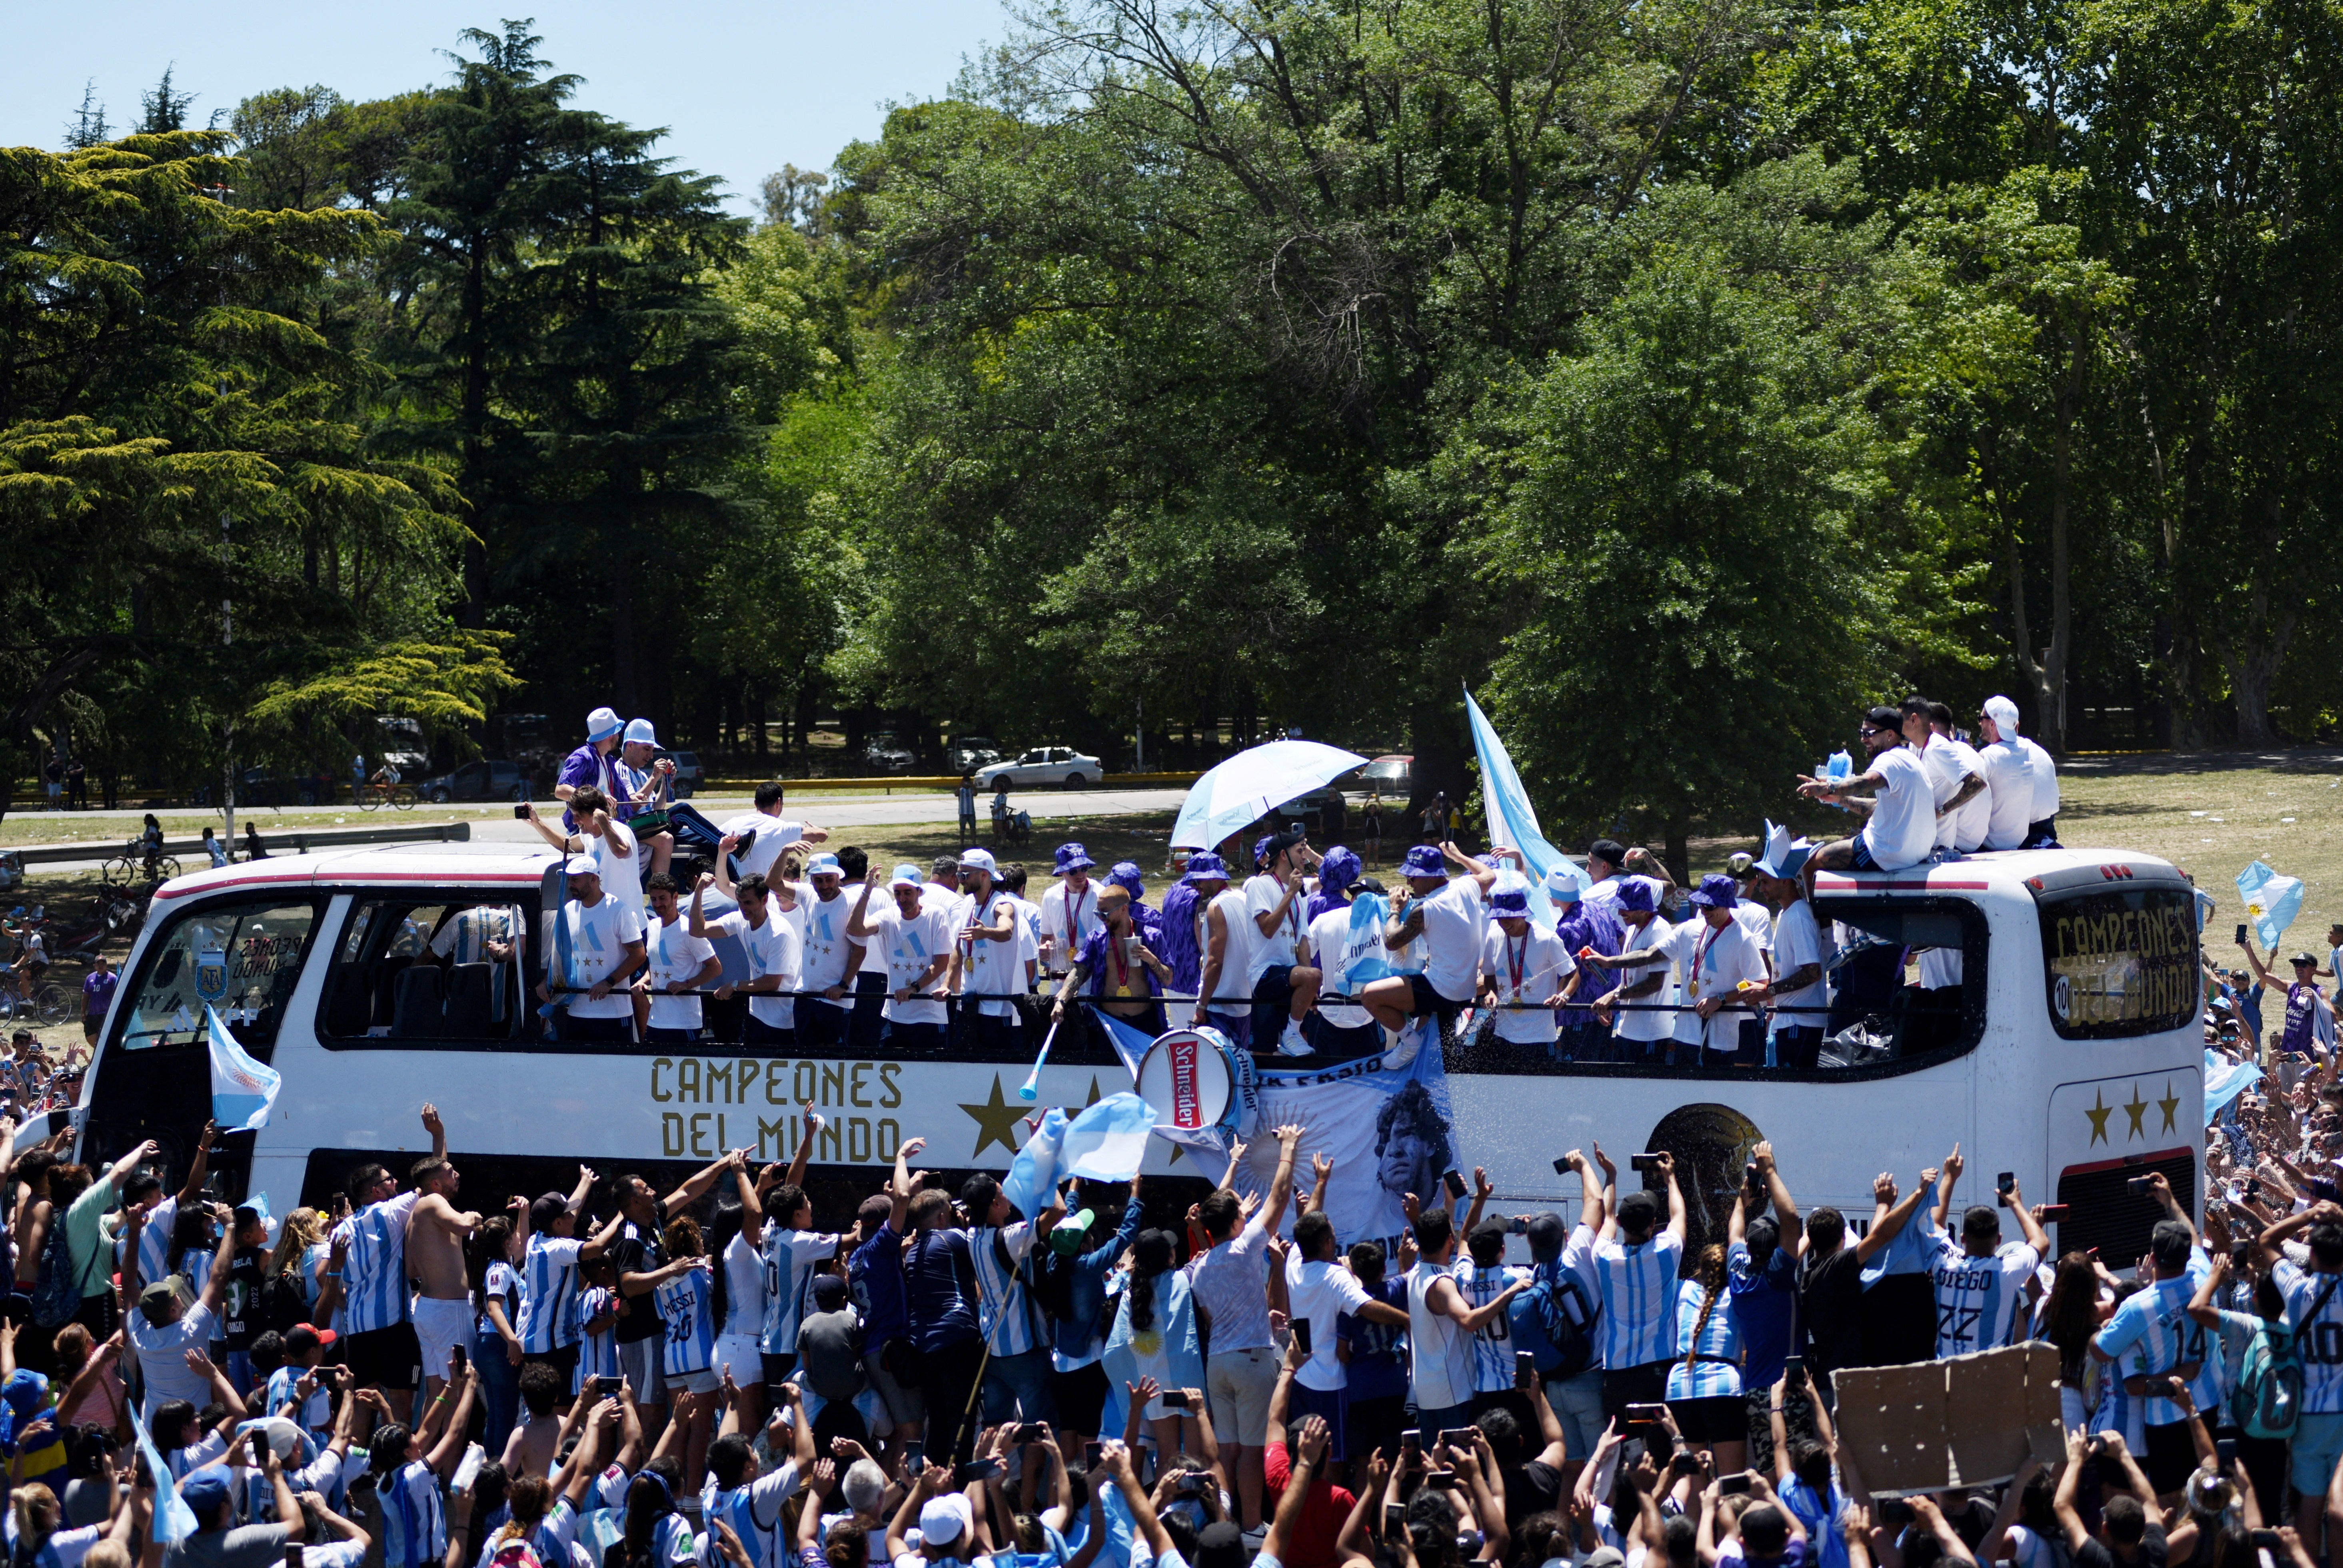 FIFA World Cup Qatar 2022 - Argentina Victory Parade after winning the World Cup